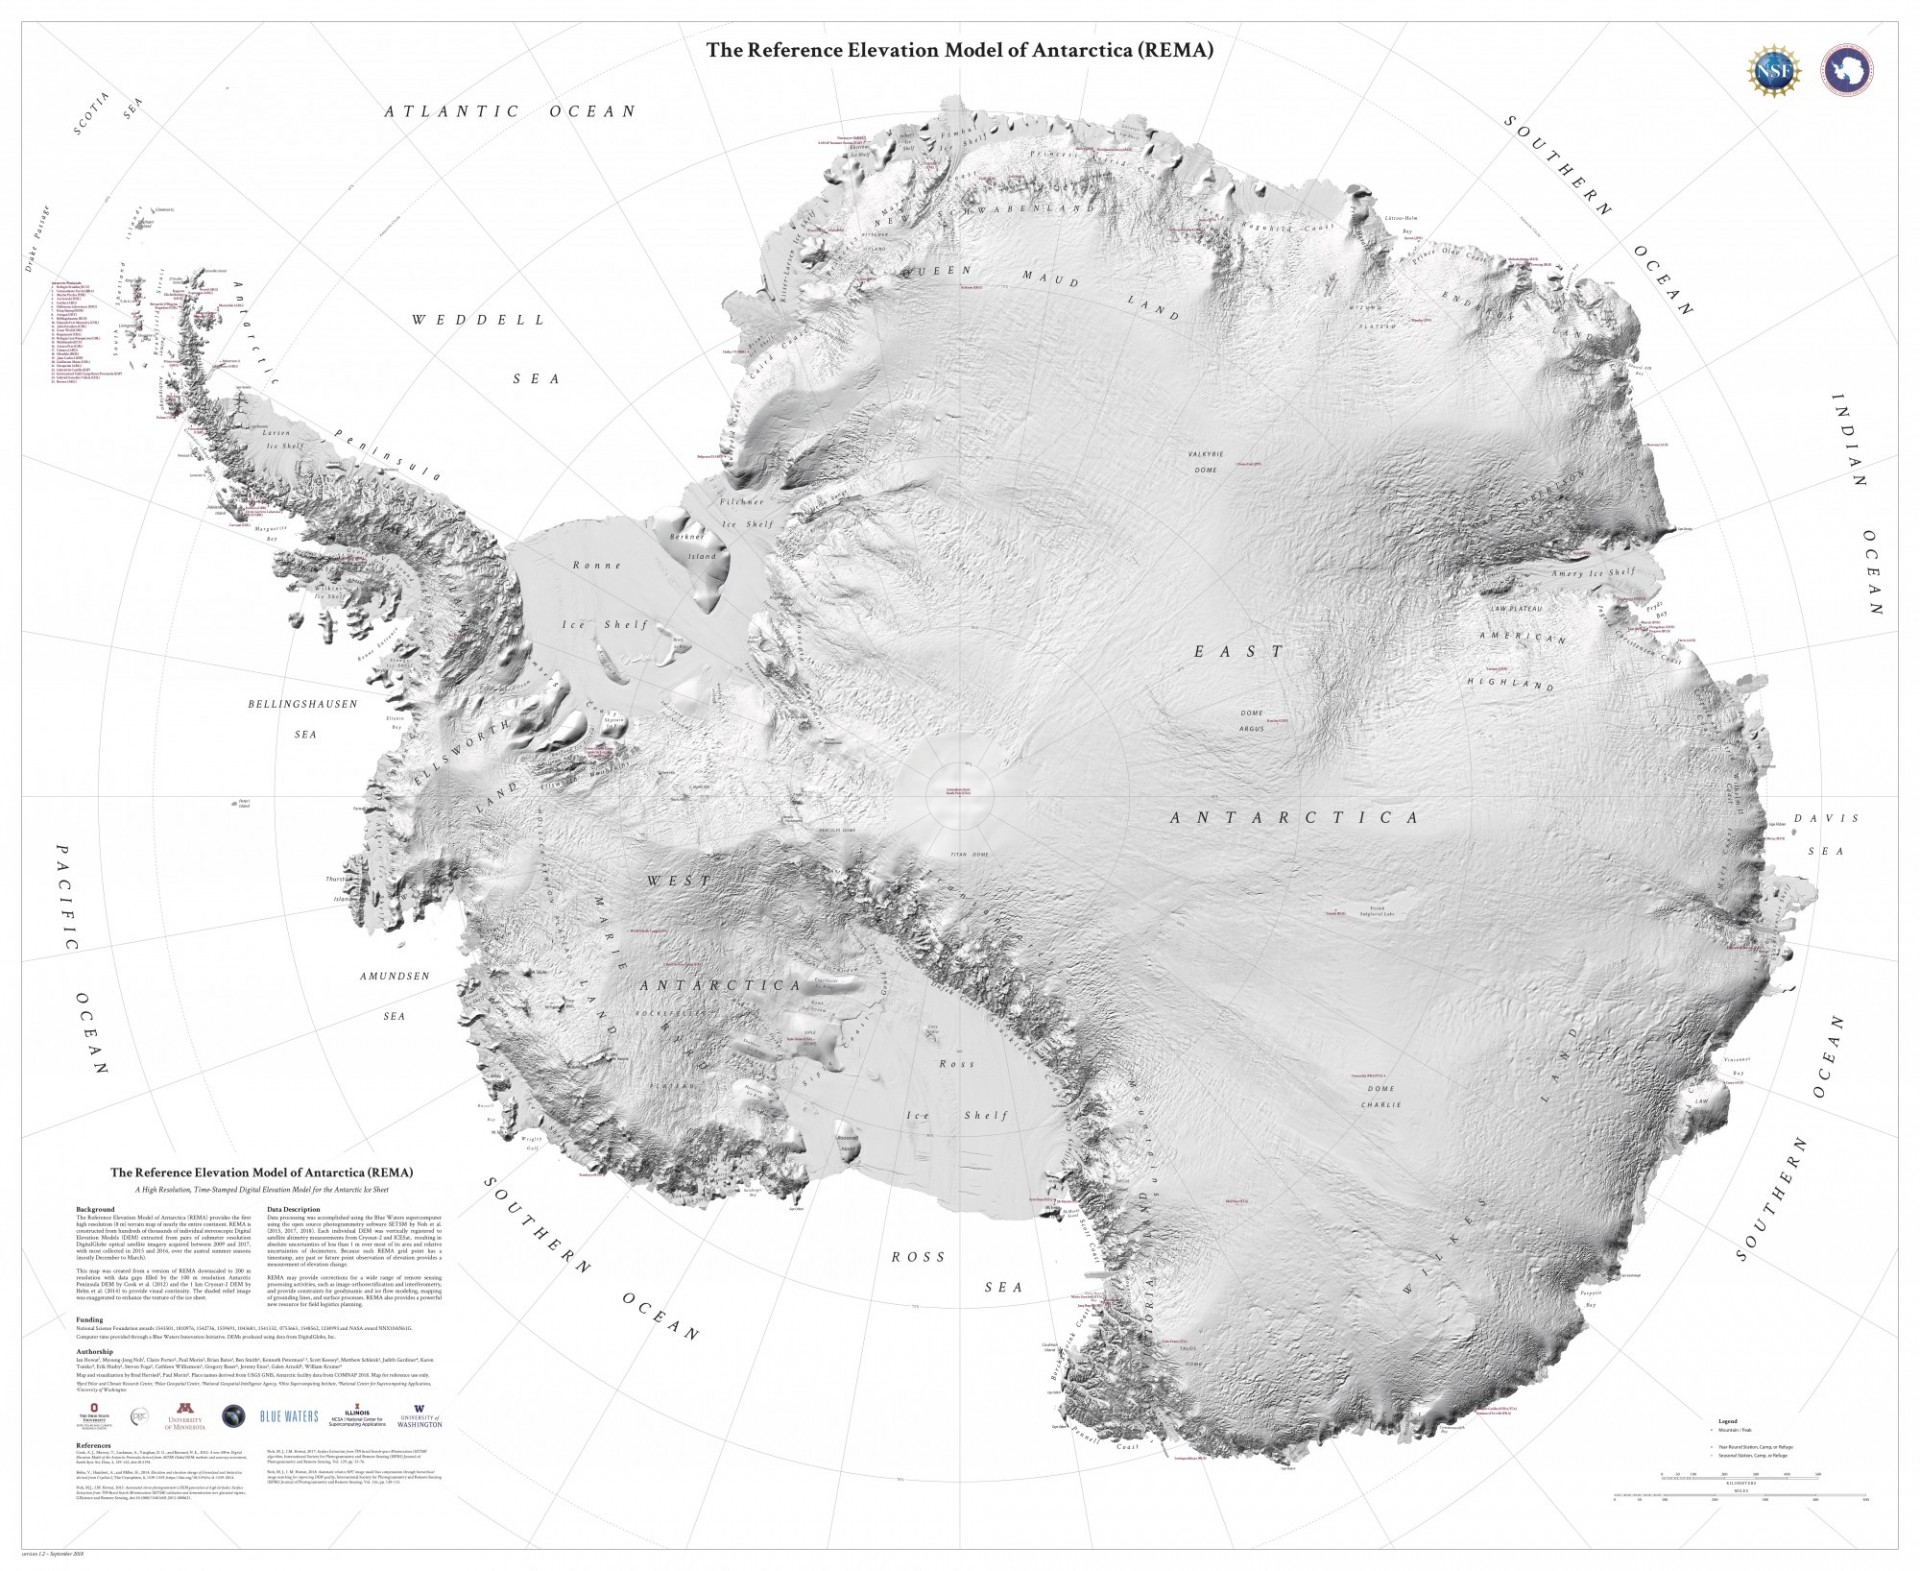 Cartographic map of the Reference Elevation Model of Antarctica by the Polar Geospatial Center